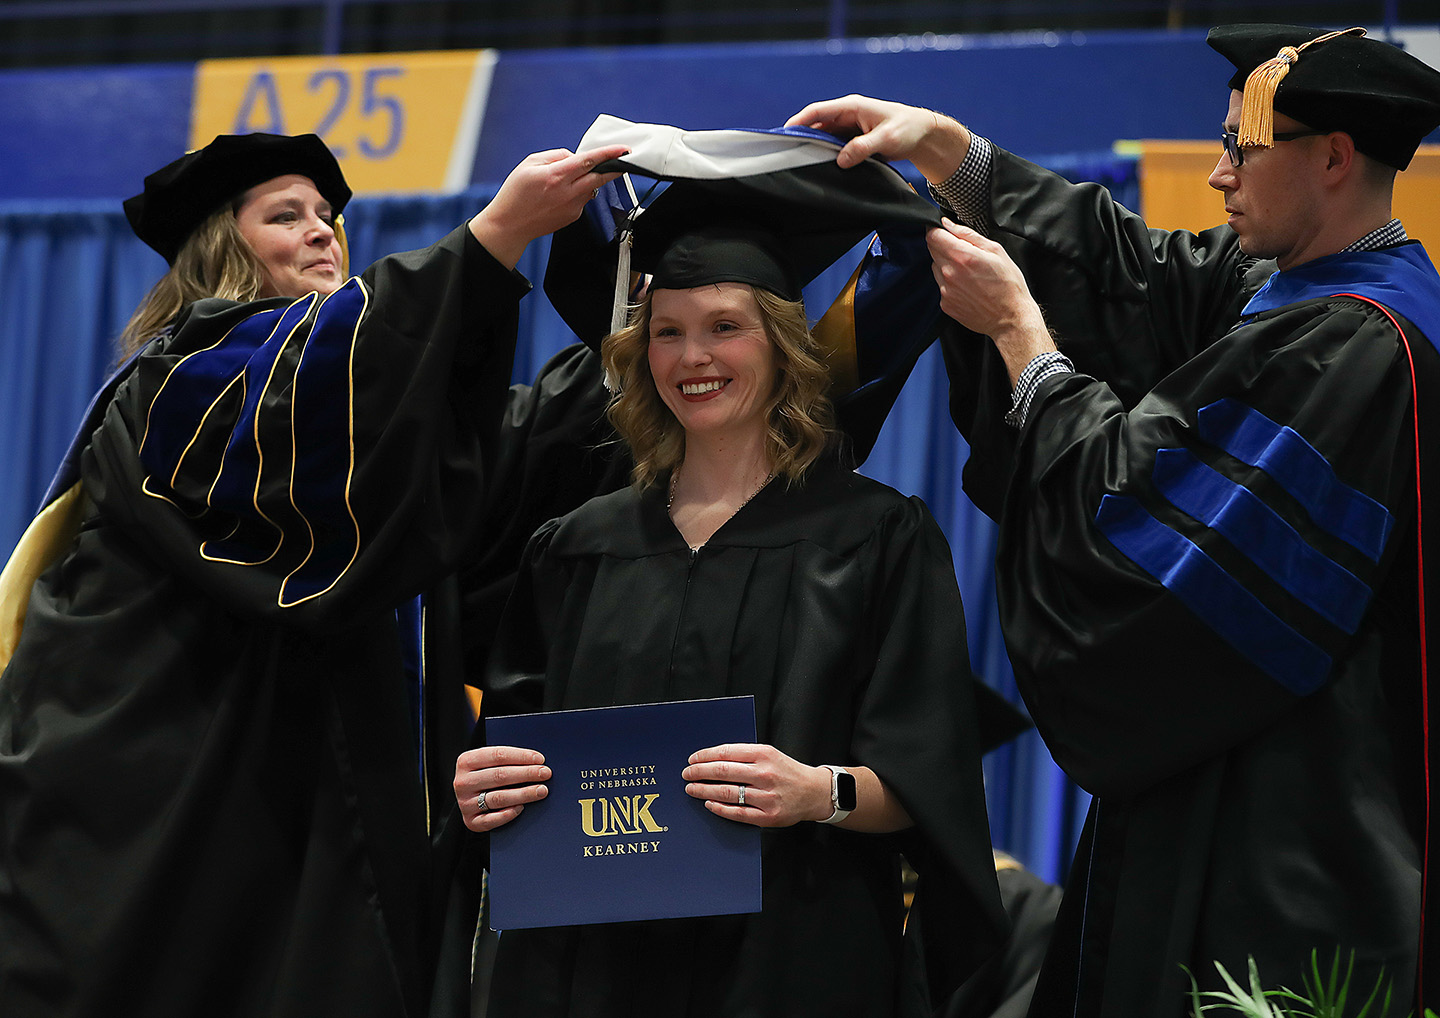 Nicole Strope, center, graduated from the University of Nebraska at Kearney last week with a master’s degree in English with a writing emphasis. It’s her third degree from UNK. (Photo by Erika Pritchard, UNK Communications)